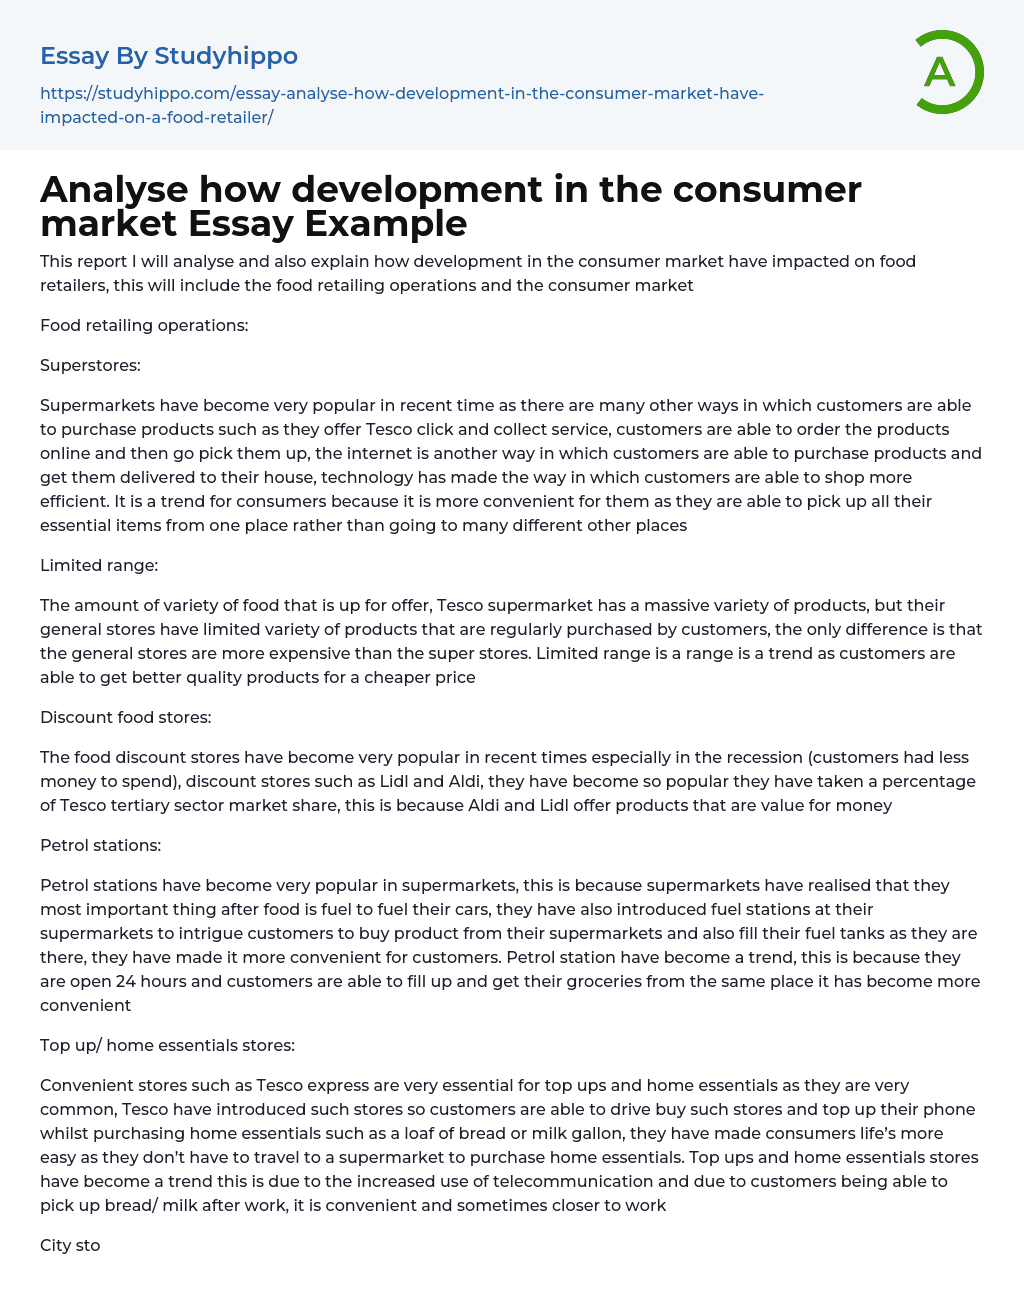 Analyse how development in the consumer market Essay Example